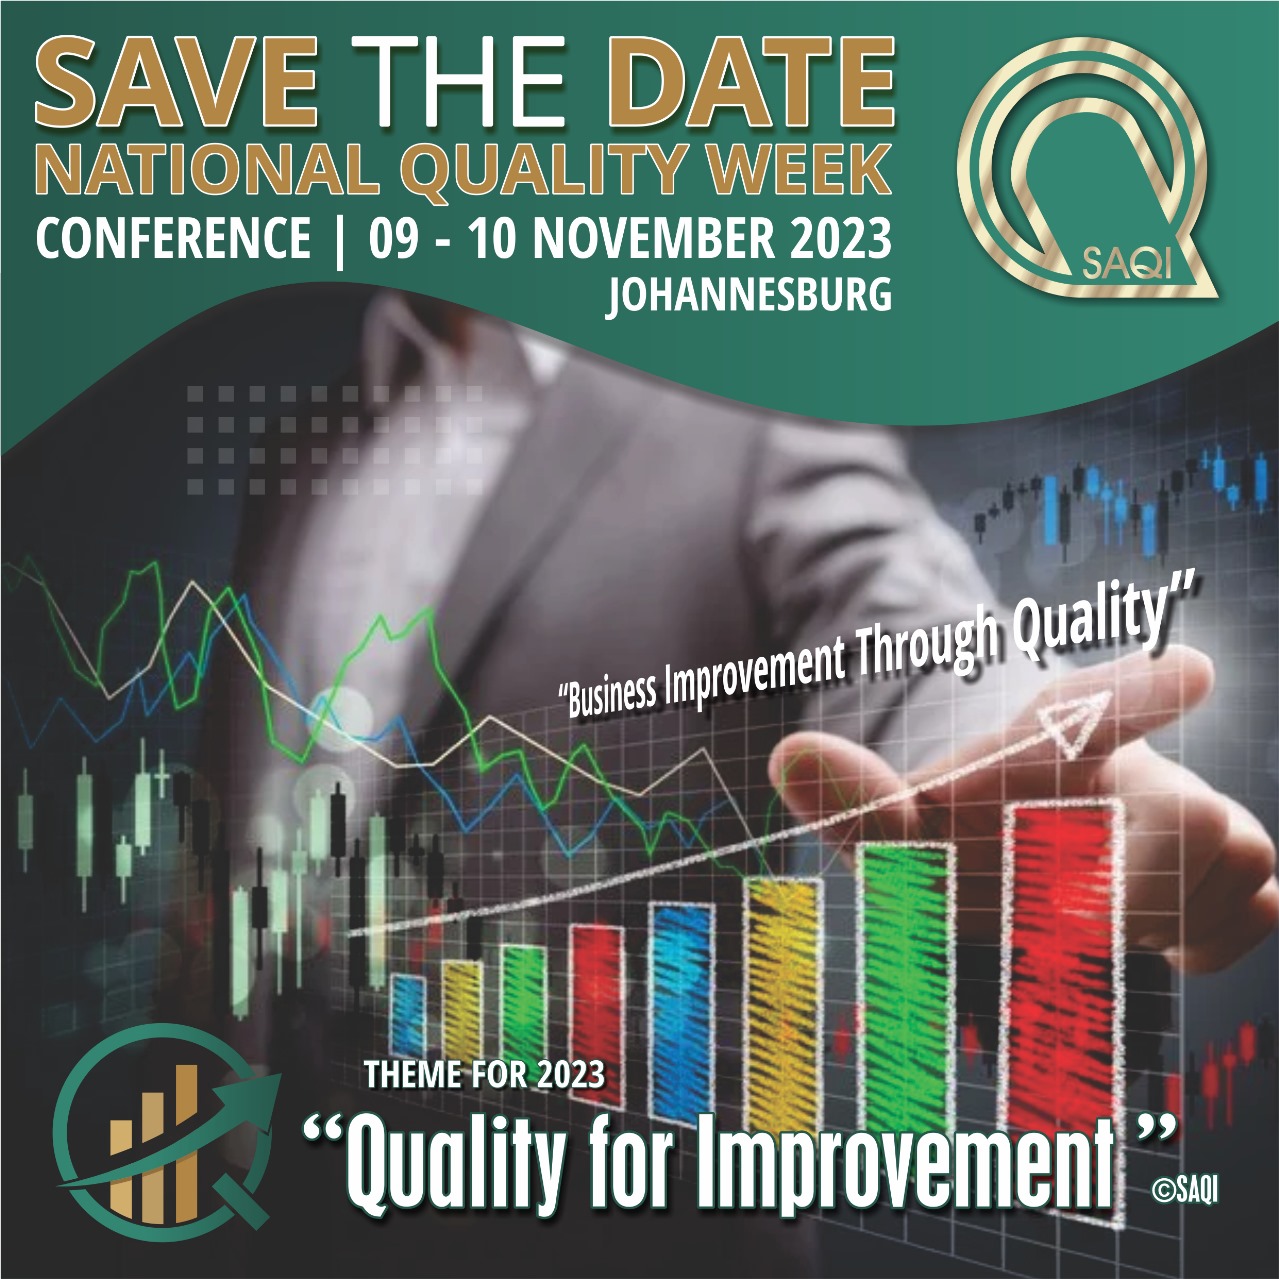 Save the Date - National Quality Week 2023